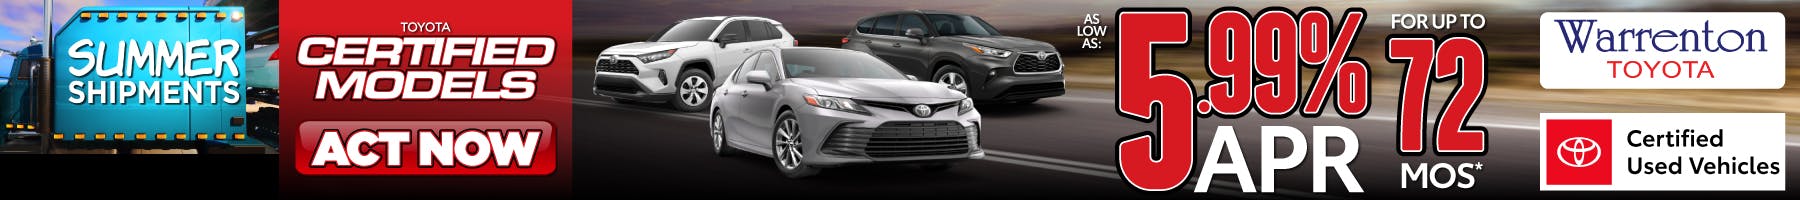 SAM JUNE – Toyota Certified Models | As low as 5.99 APR for up to 72 mos. | Warrenton Toyota